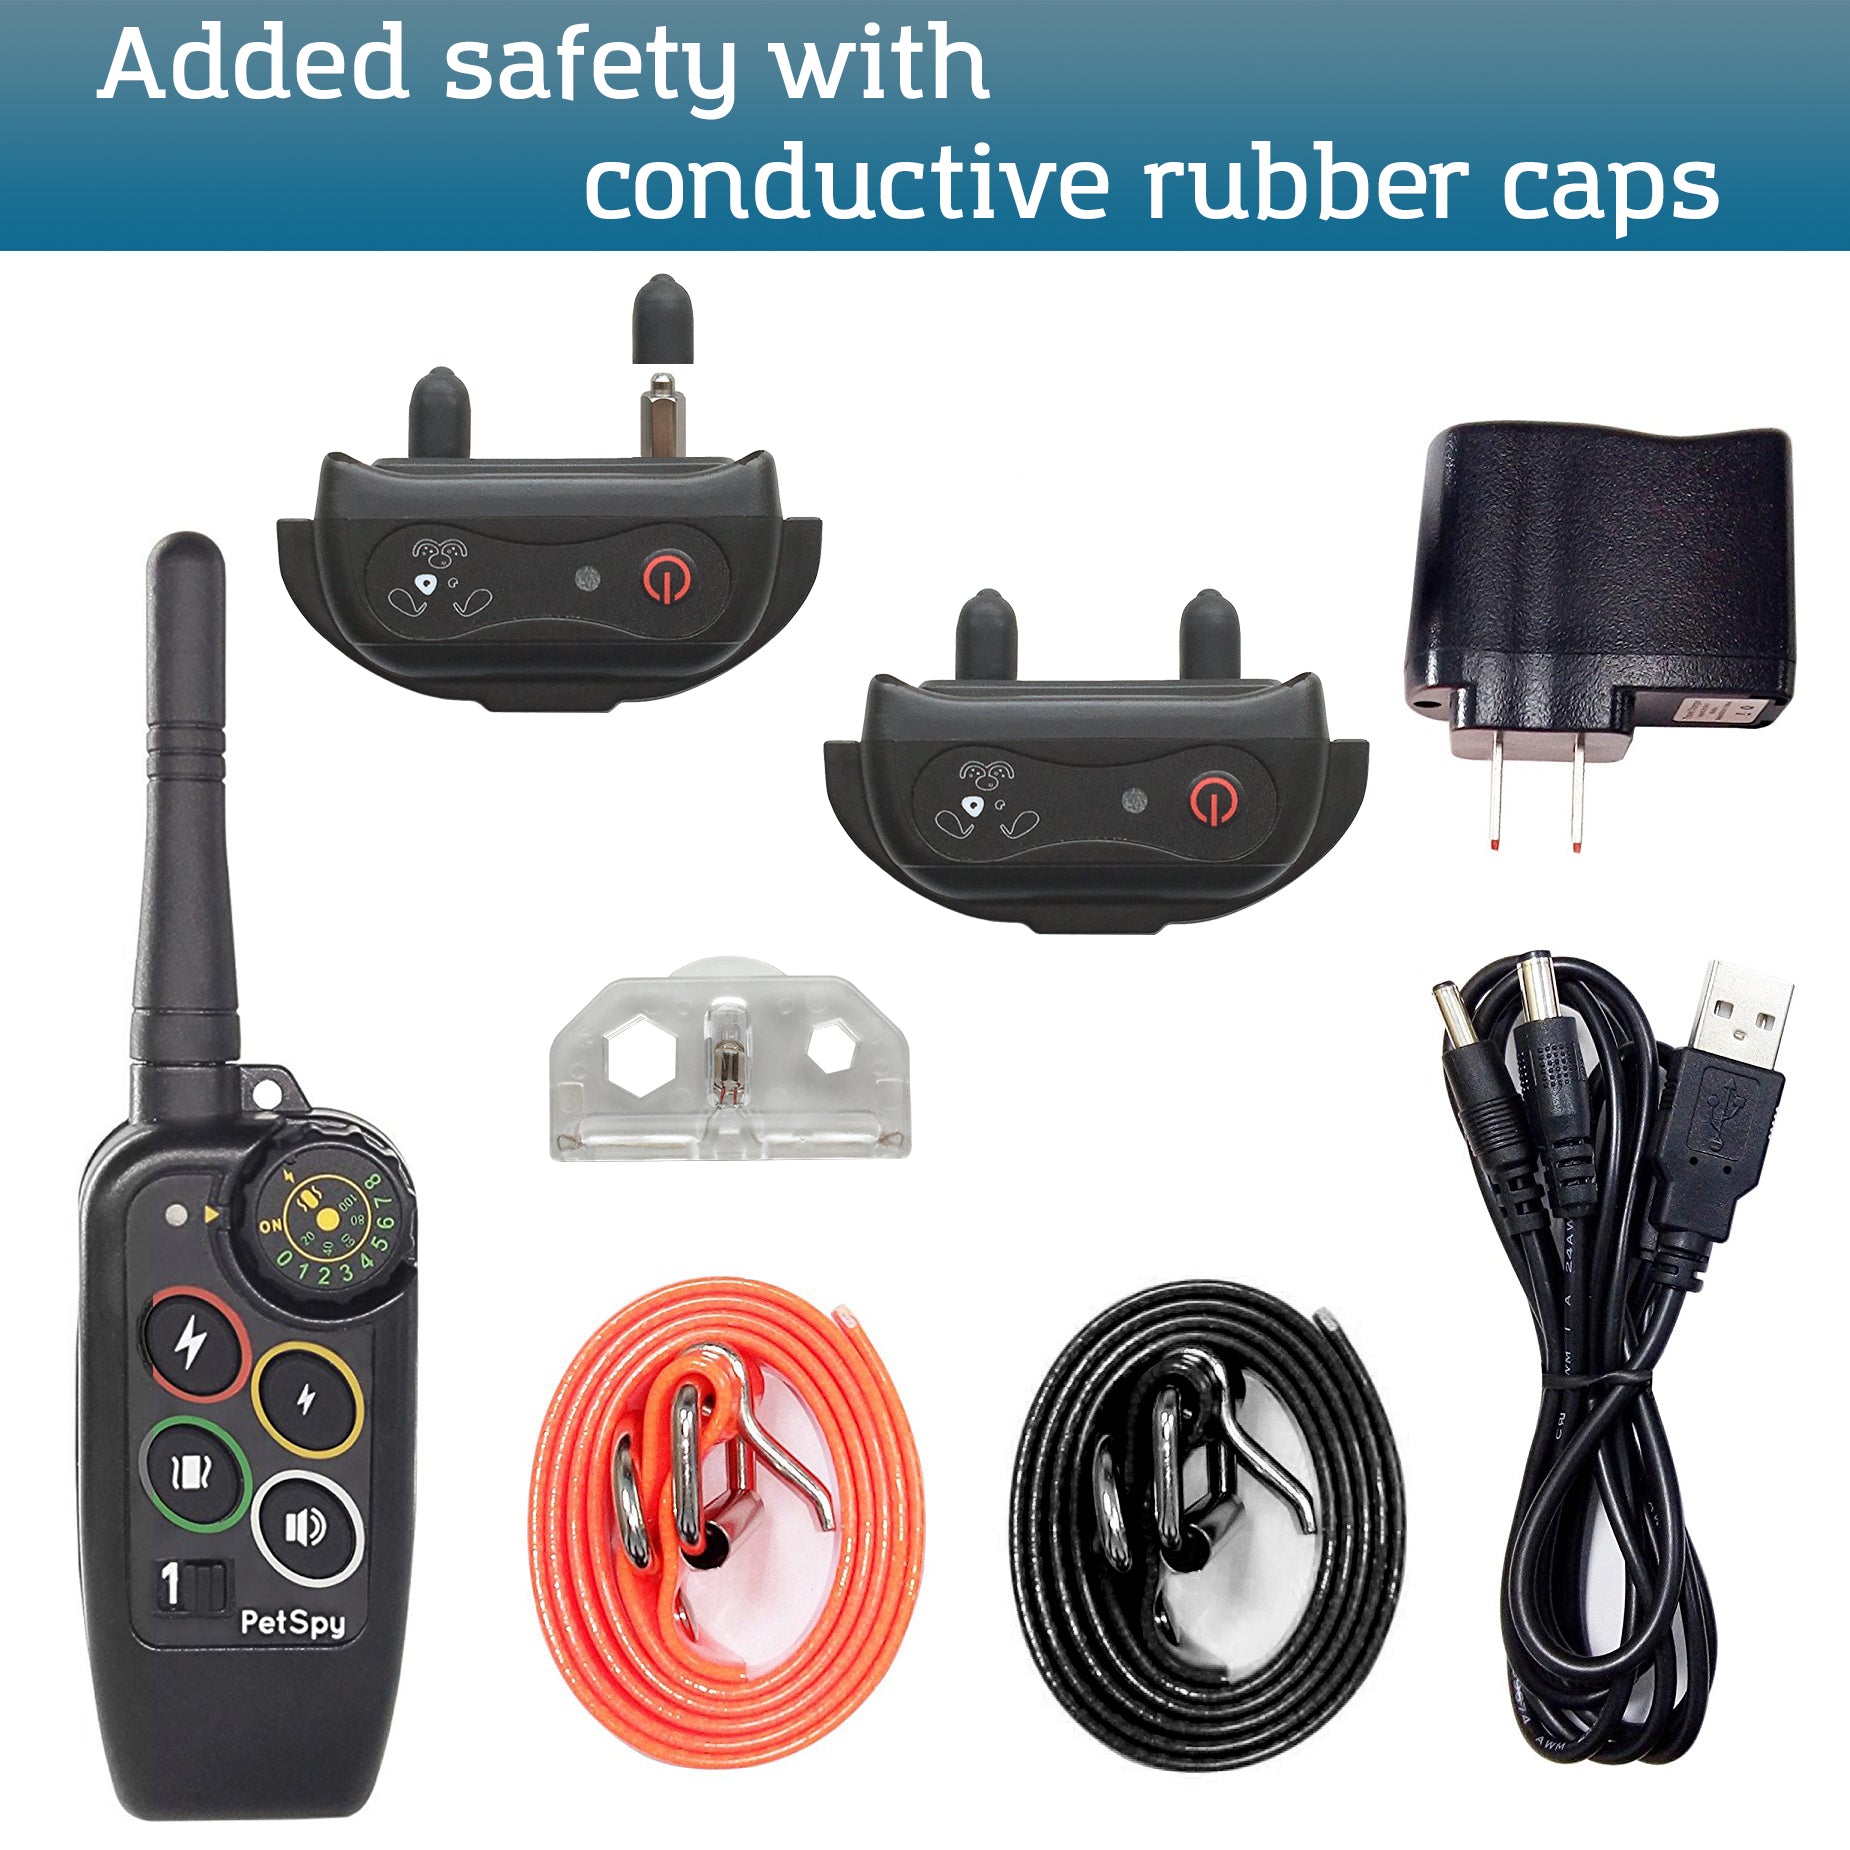 include: Remote Transmitter, Collar Receiver, Adjustable TPU Strap, Dual USB Charger, Test Bulb and User Guide